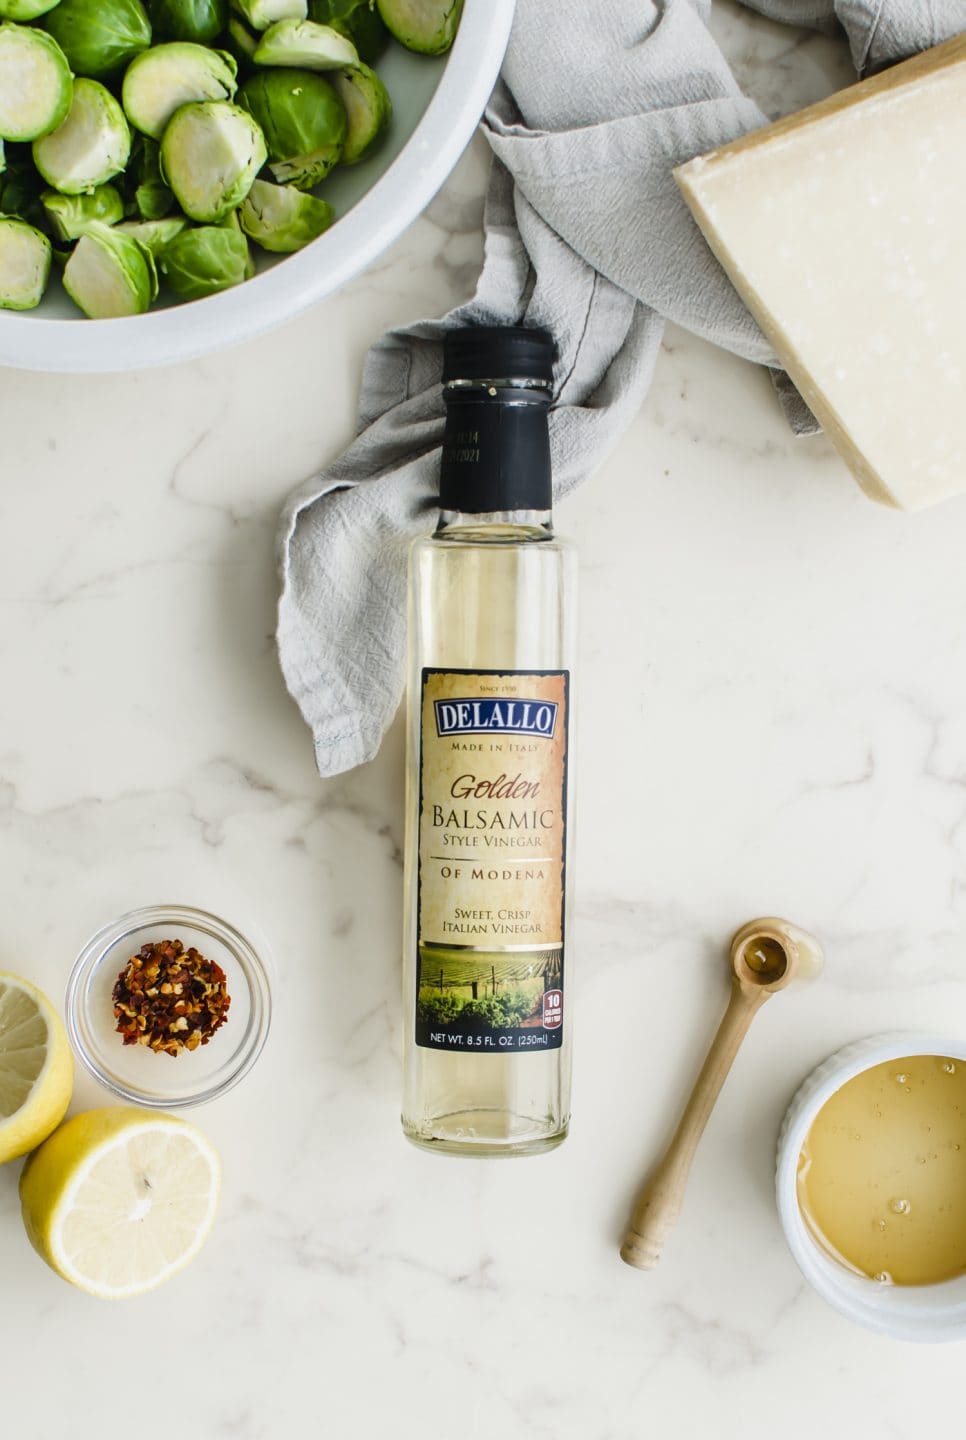 A bottle of white balsamic vinegar surrounded by prep bowls with other ingredients.